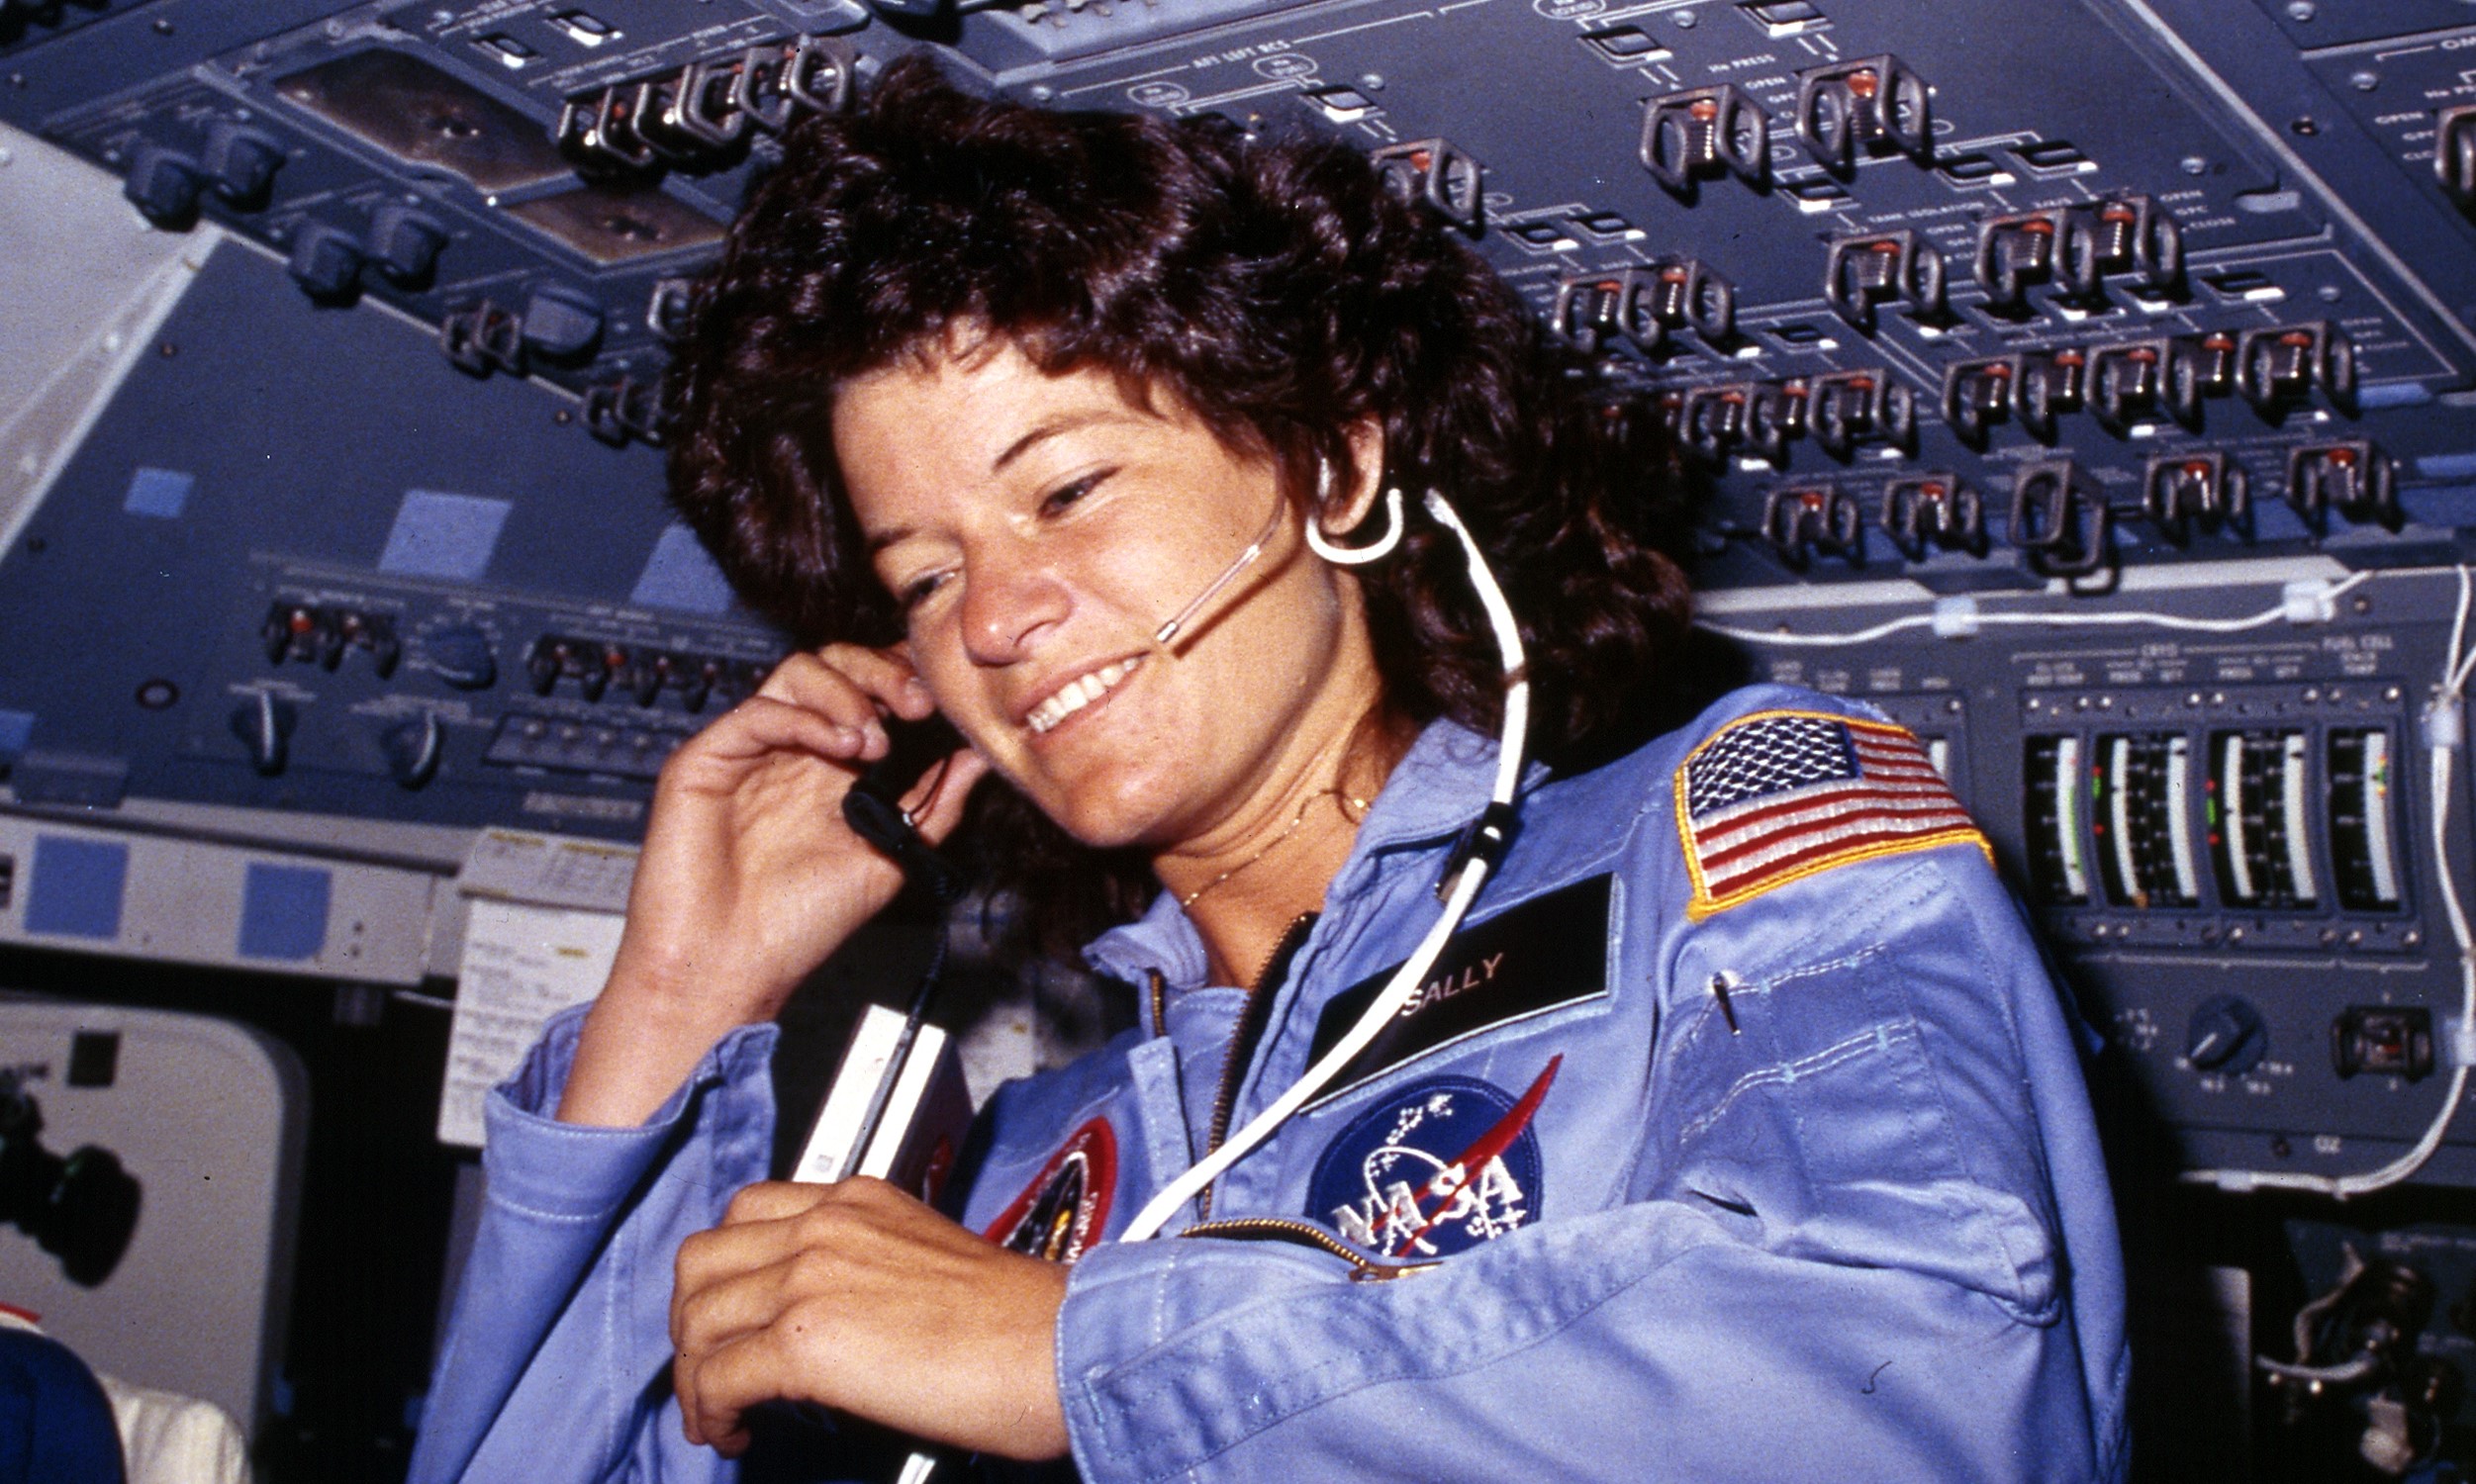 ENTITY discusses why Sally Ride is one of the important female astronauts.